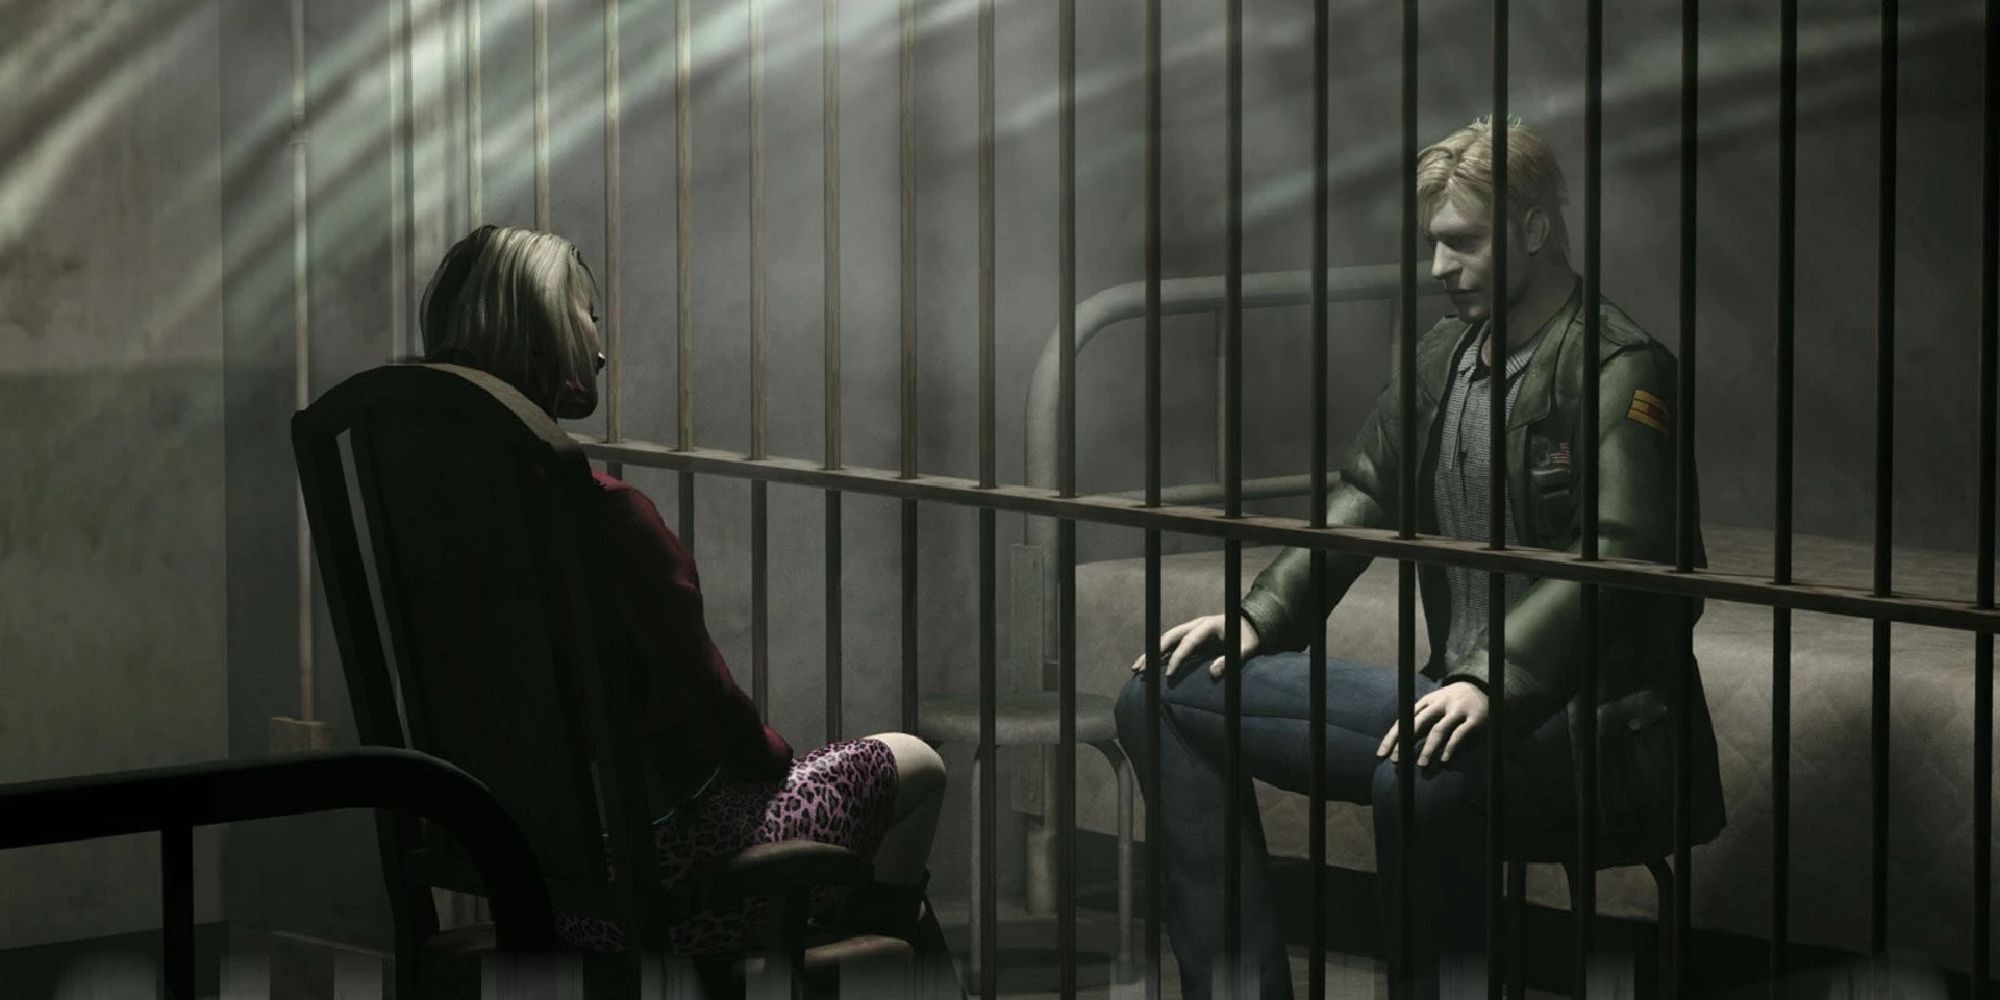 James speaking to Marie through the bars of a jail cell. 